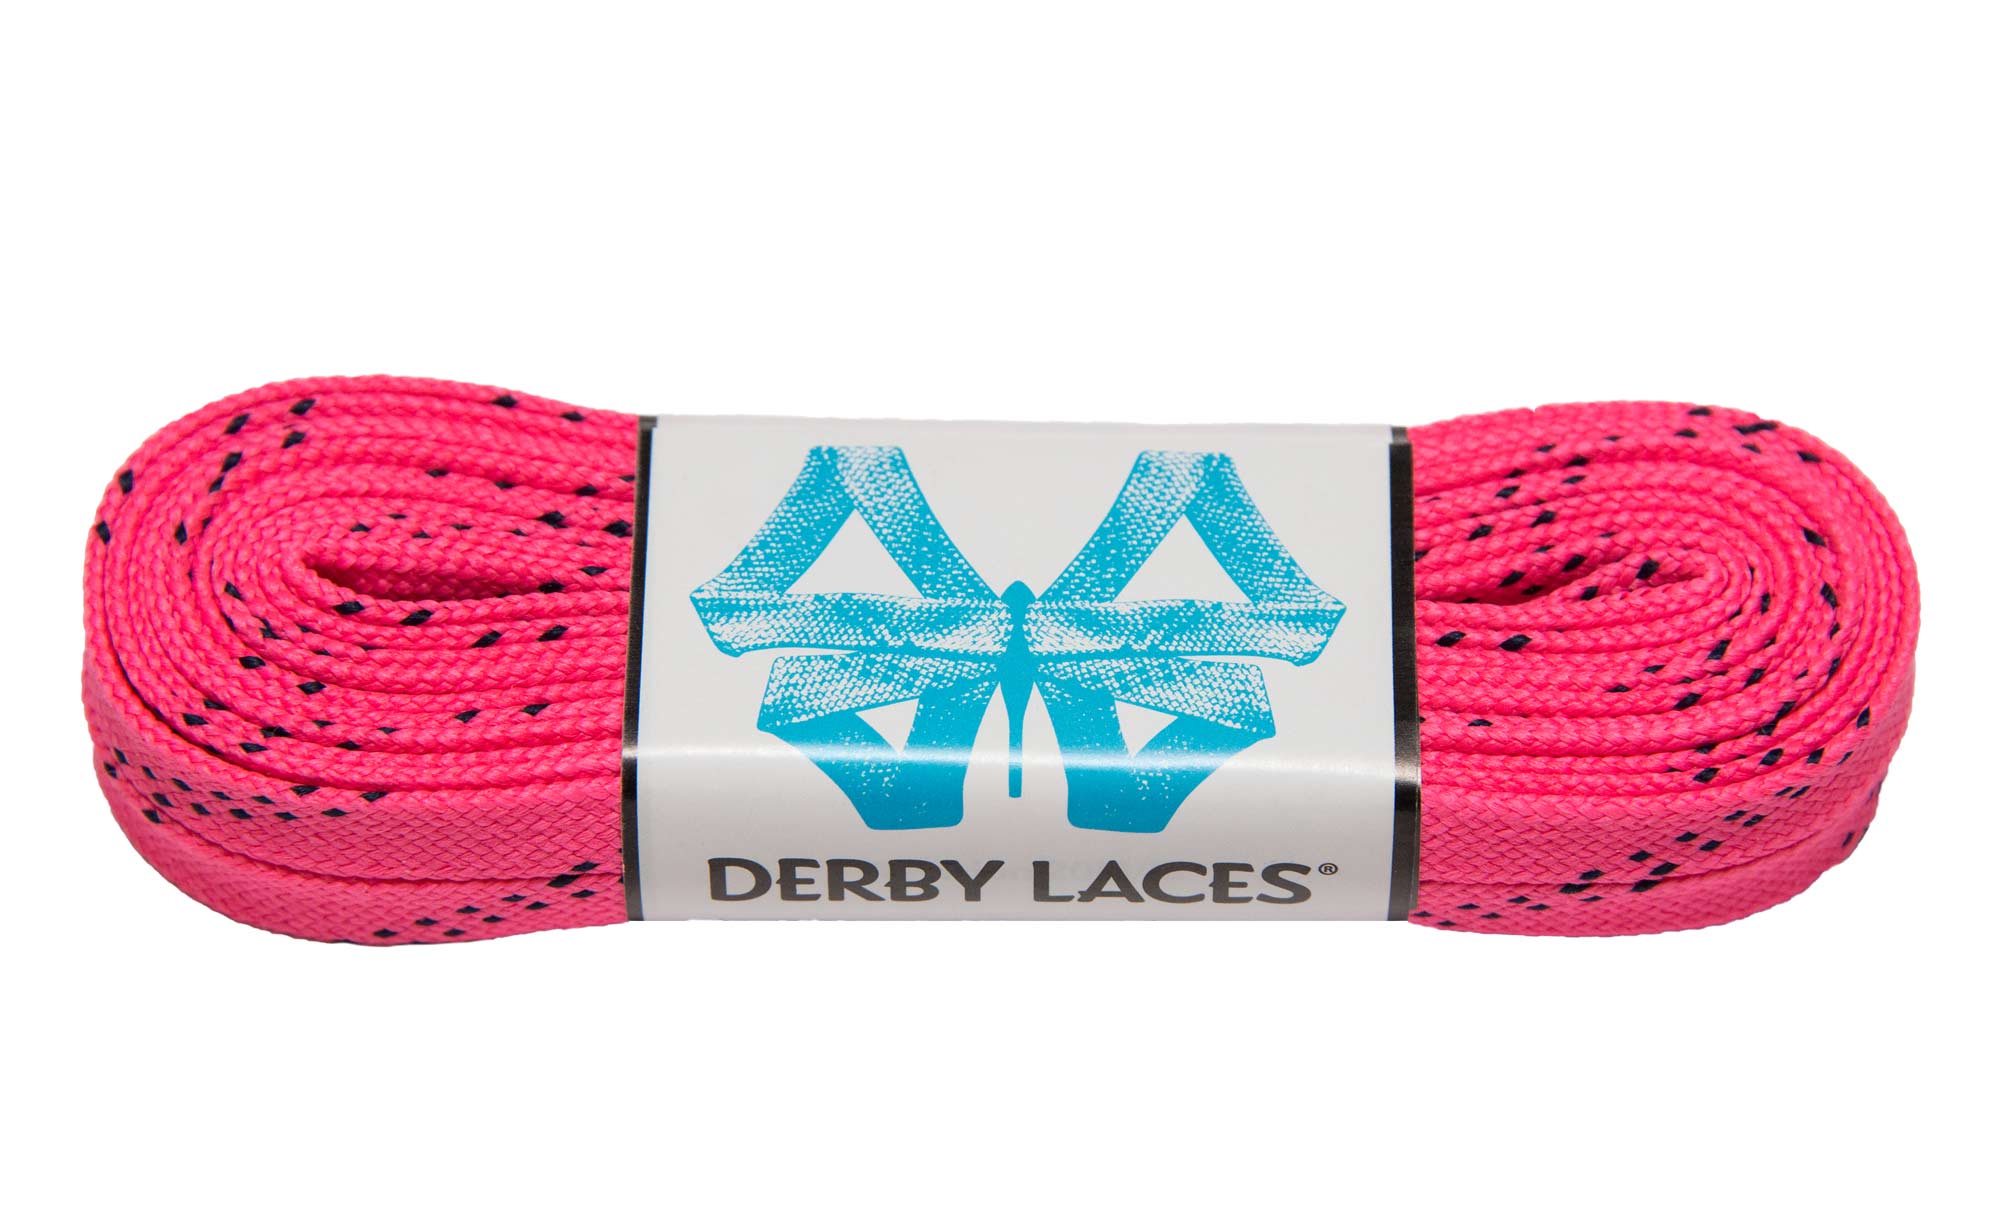 and Boots Derby Laces Camouflage 108 Inch Waxed Skate Lace for Roller Derby Hockey and Ice Skates 